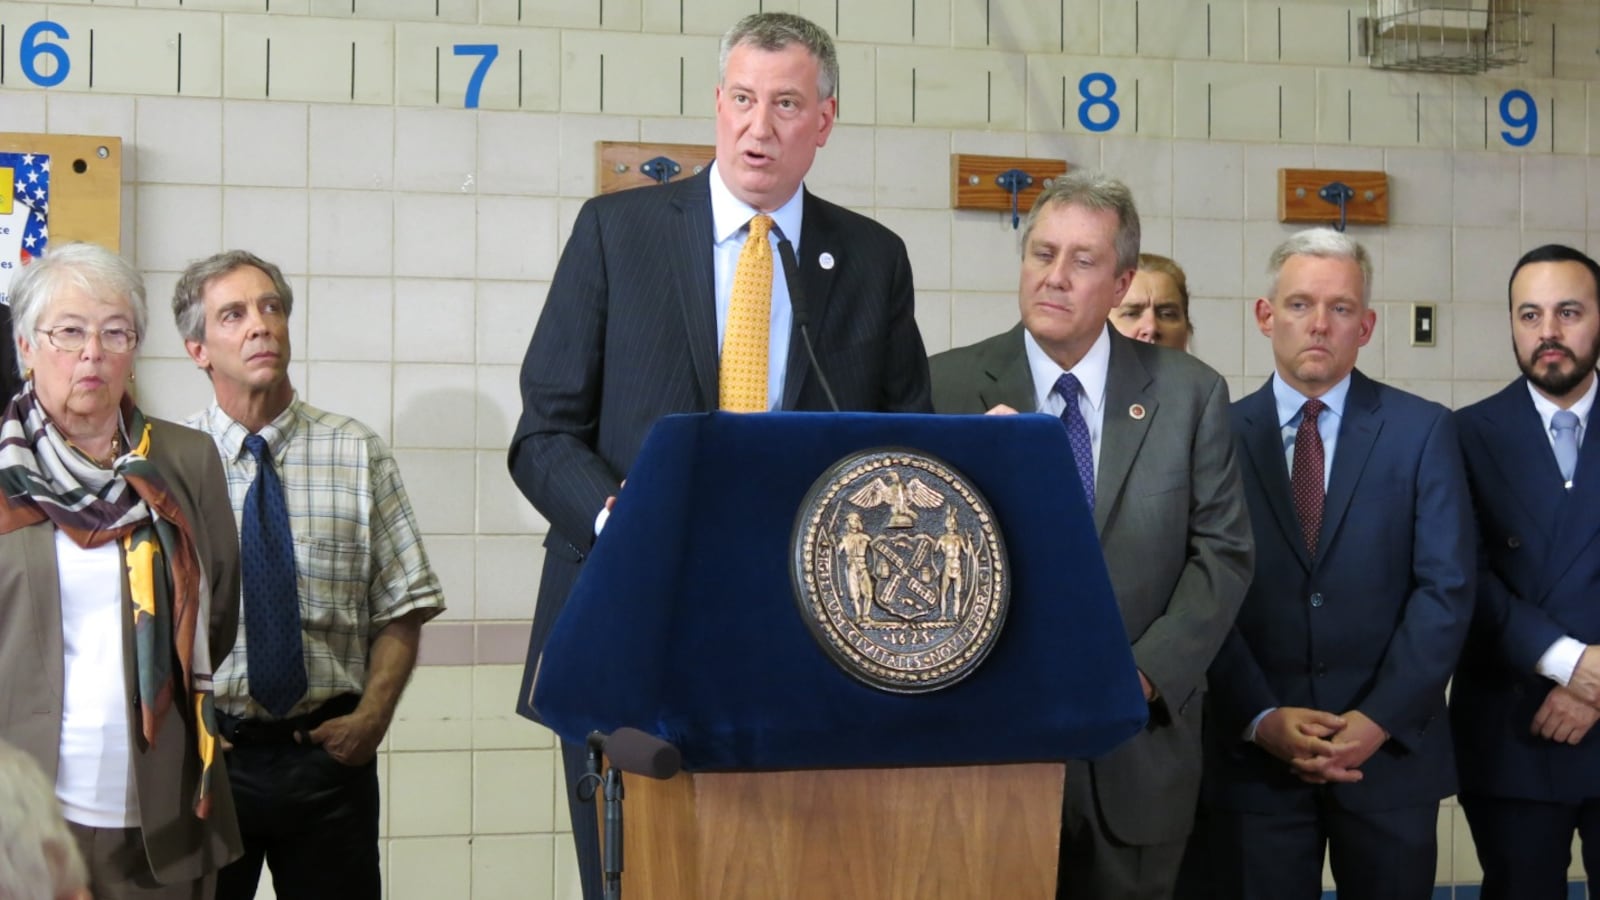 Mayor Bill de Blasio touted "important reforms" in his budget plan and the proposed teachers contract at a press conference Monday at P.S. 69 in Queens.